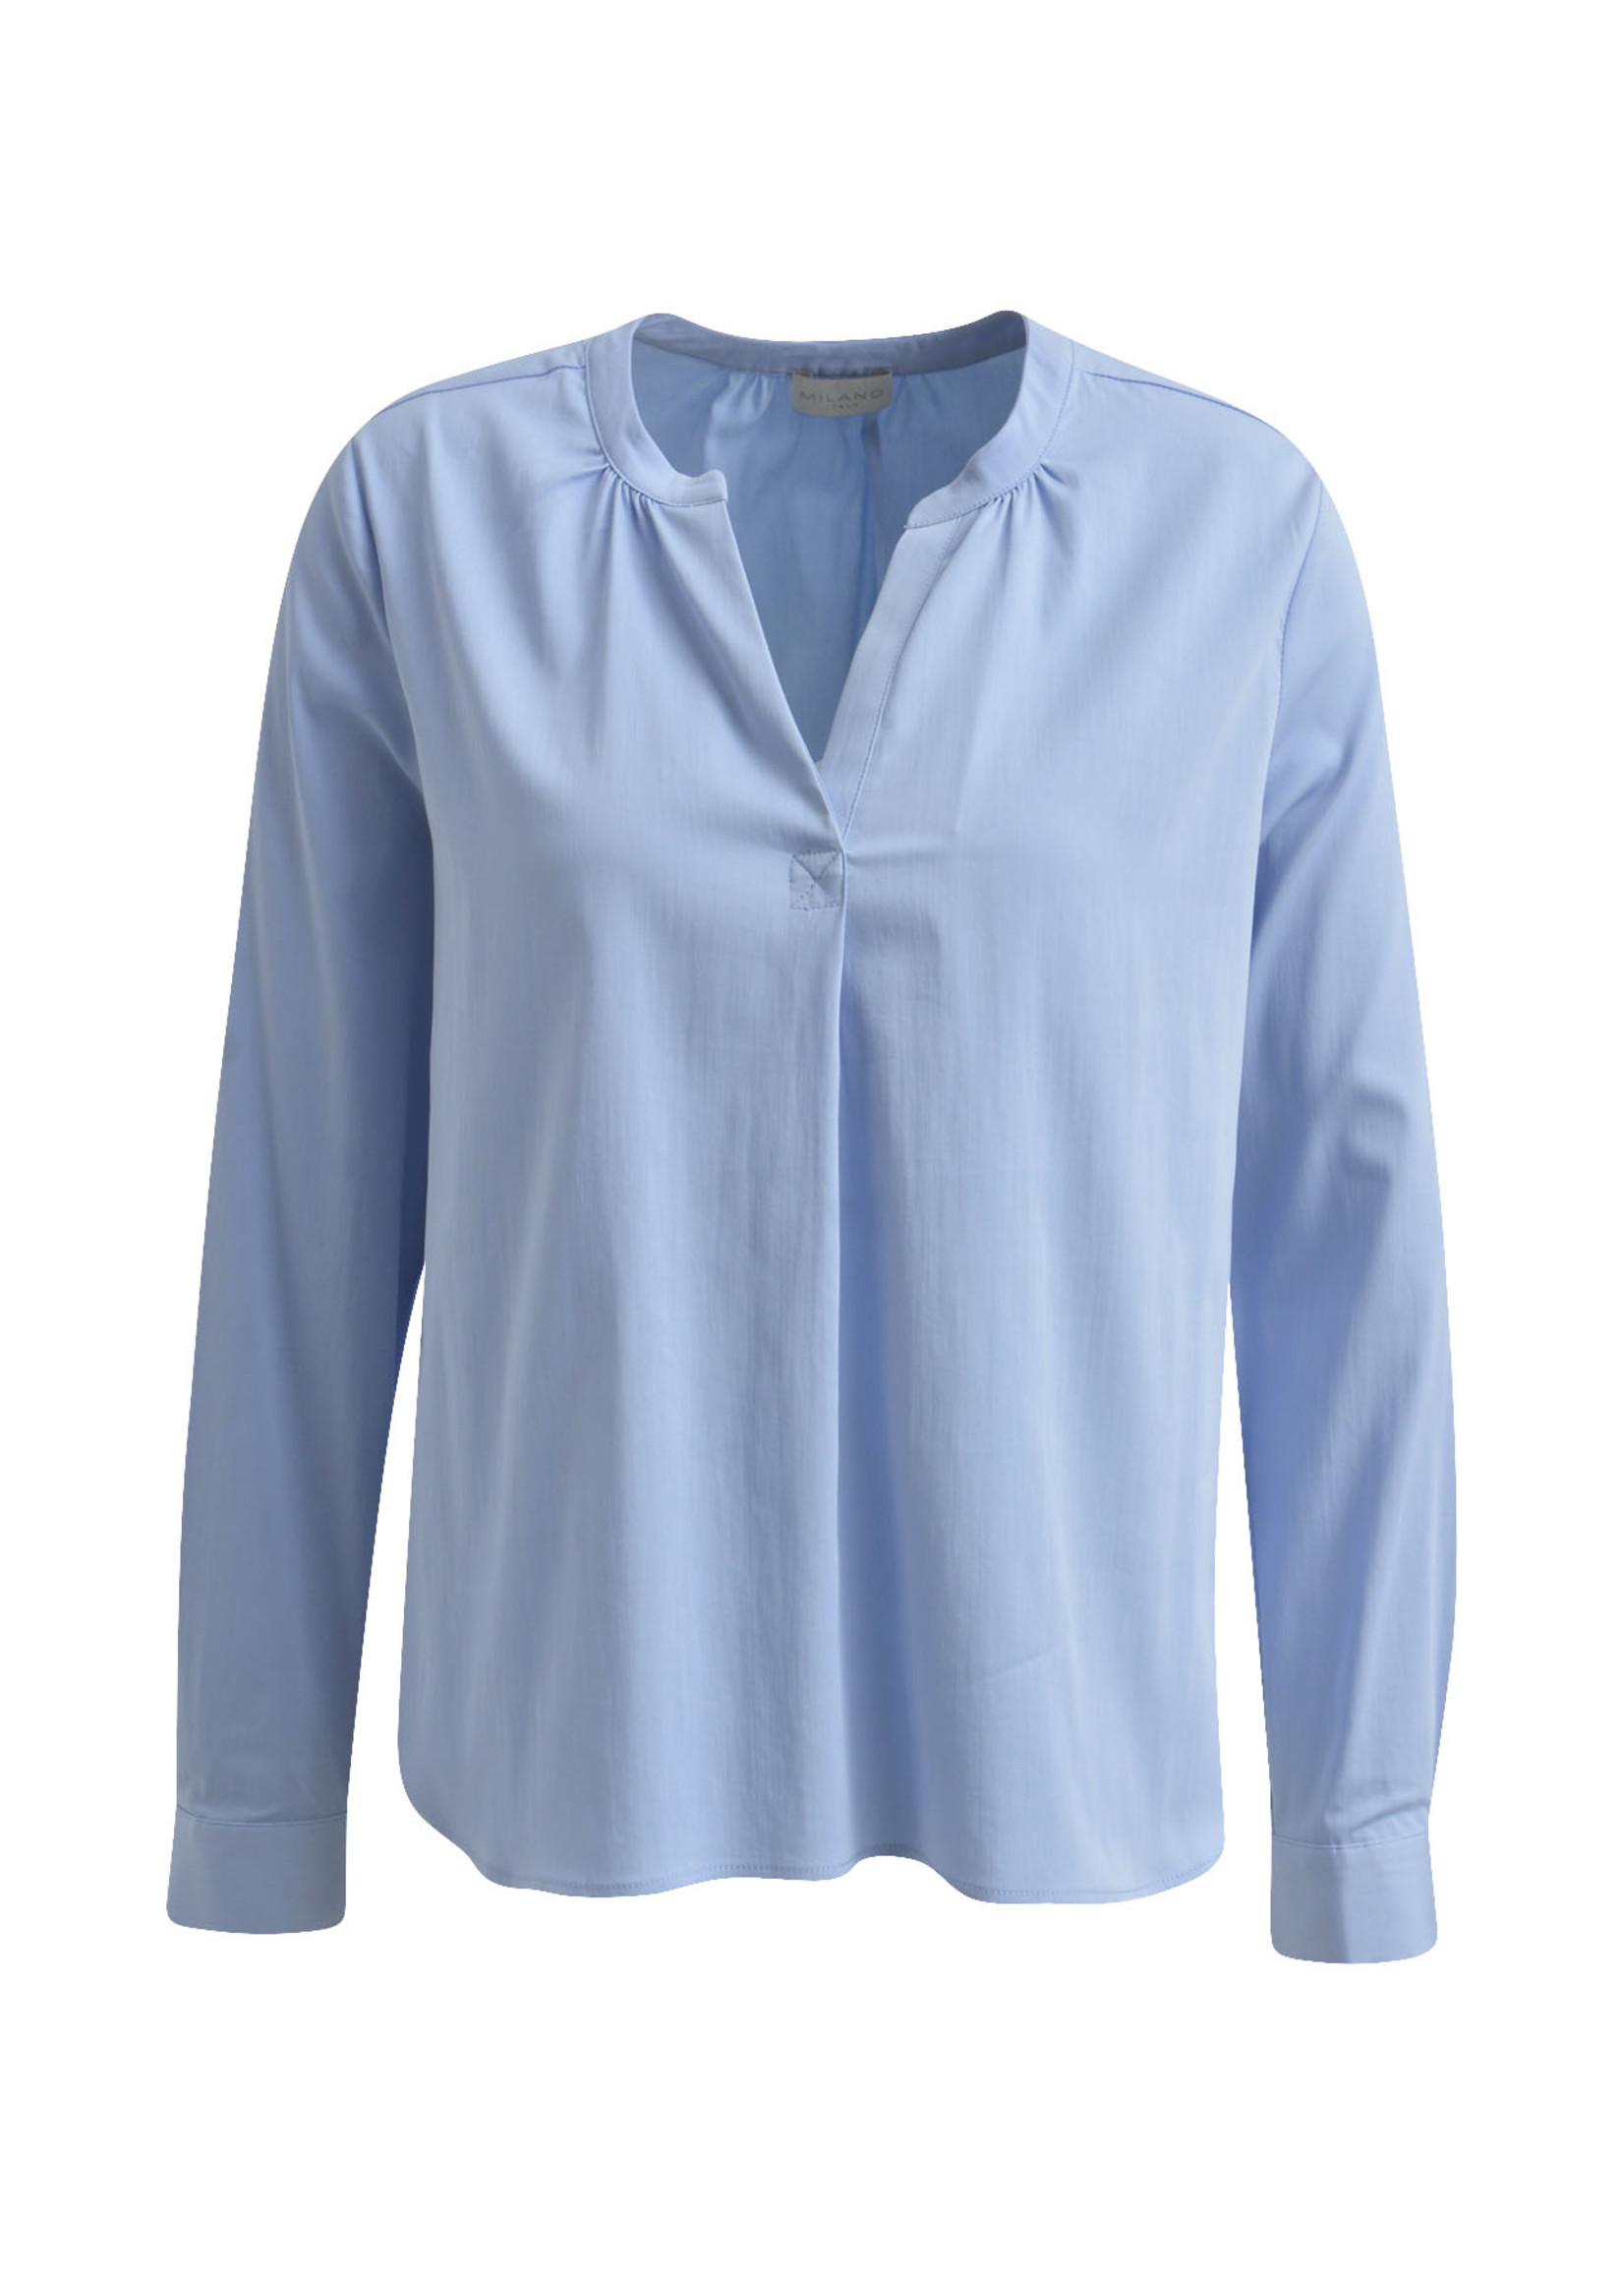 Milano Blouse with V-Neck, cuffs and gathering at neckline